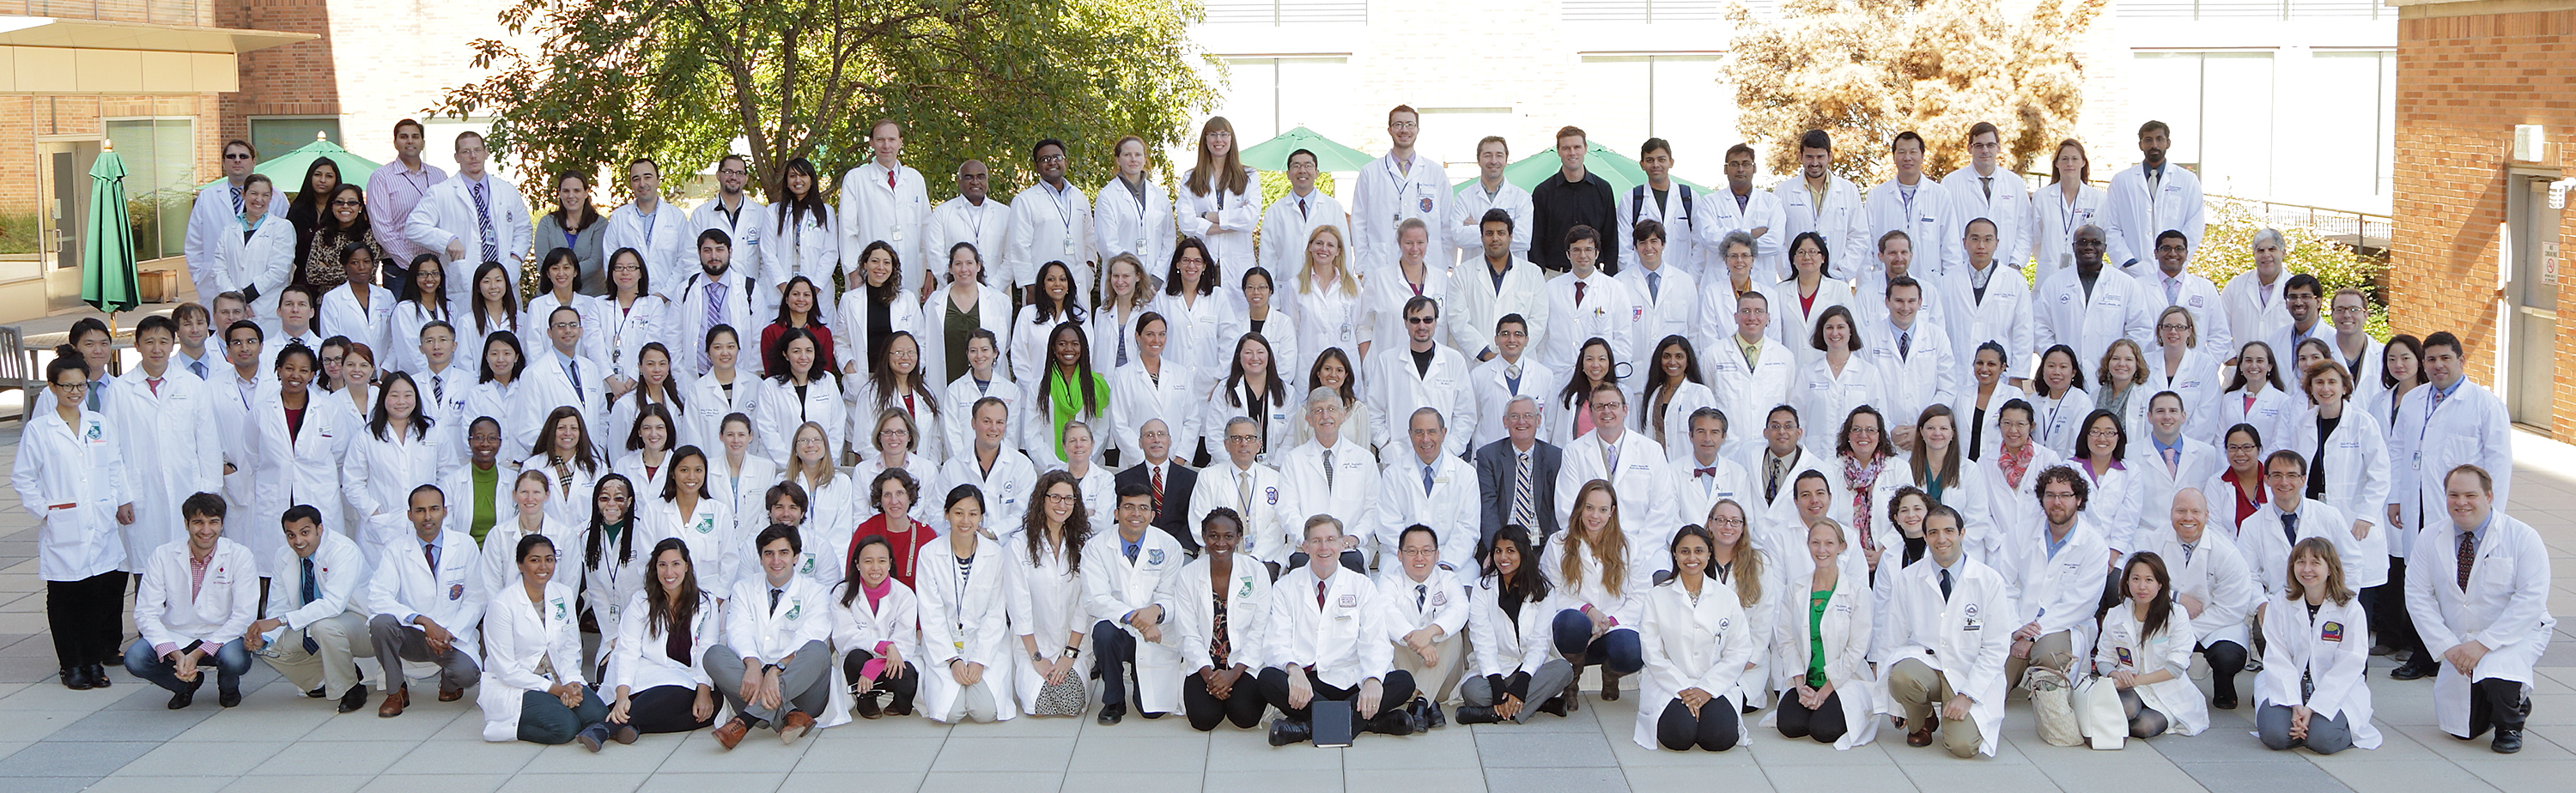 Group photo of NIH clinical fellows and faculty